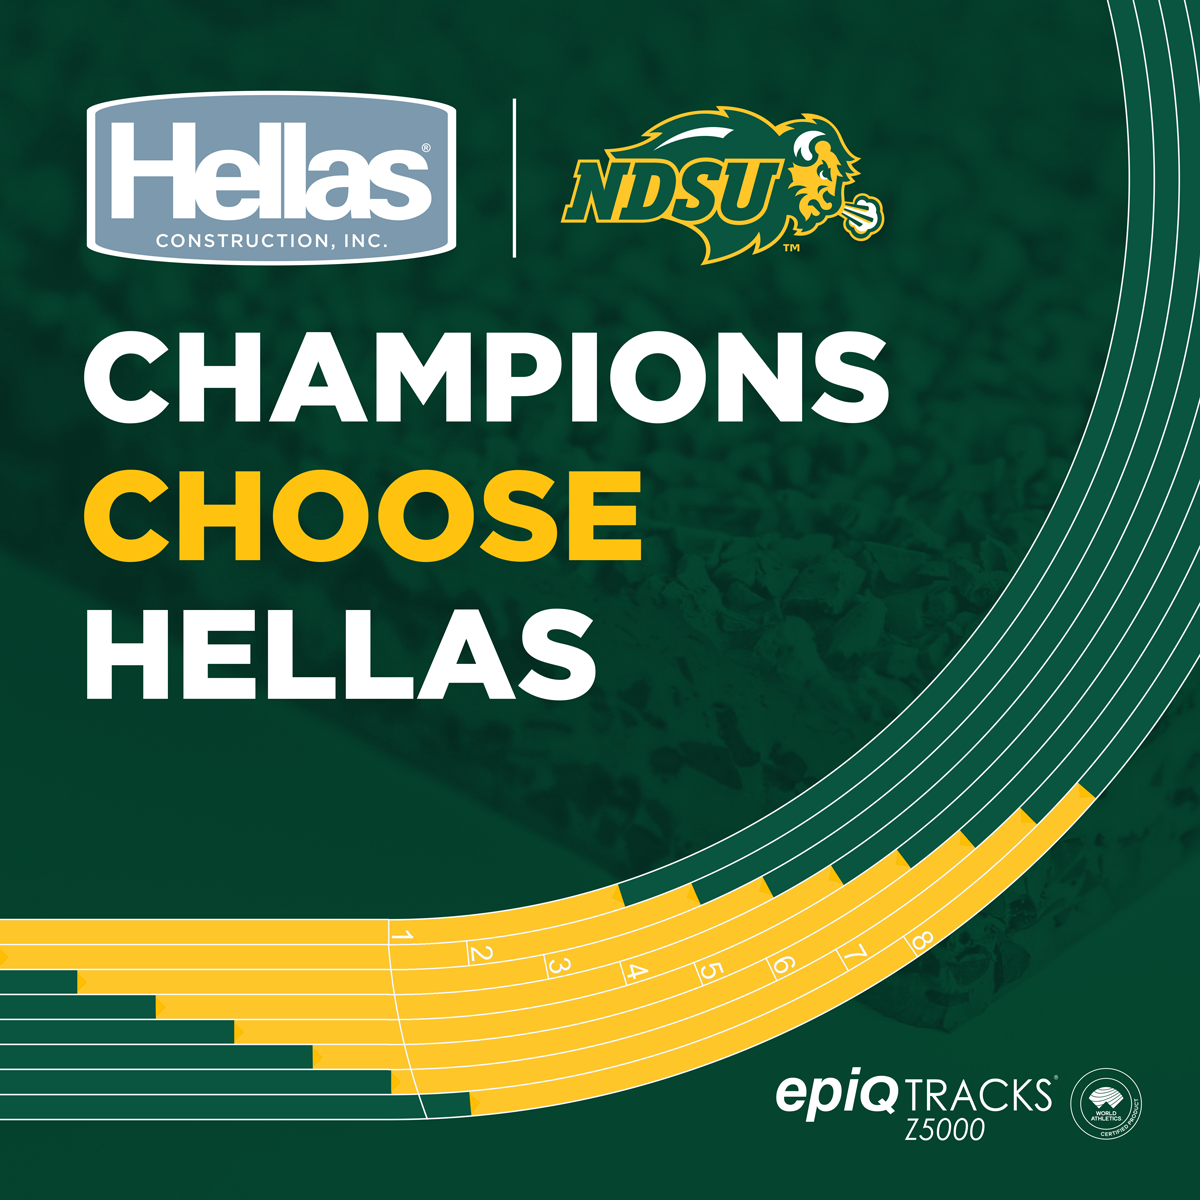 NDSU is set with a Z5000 Olympic World Athletics certified epiQ Tracks System